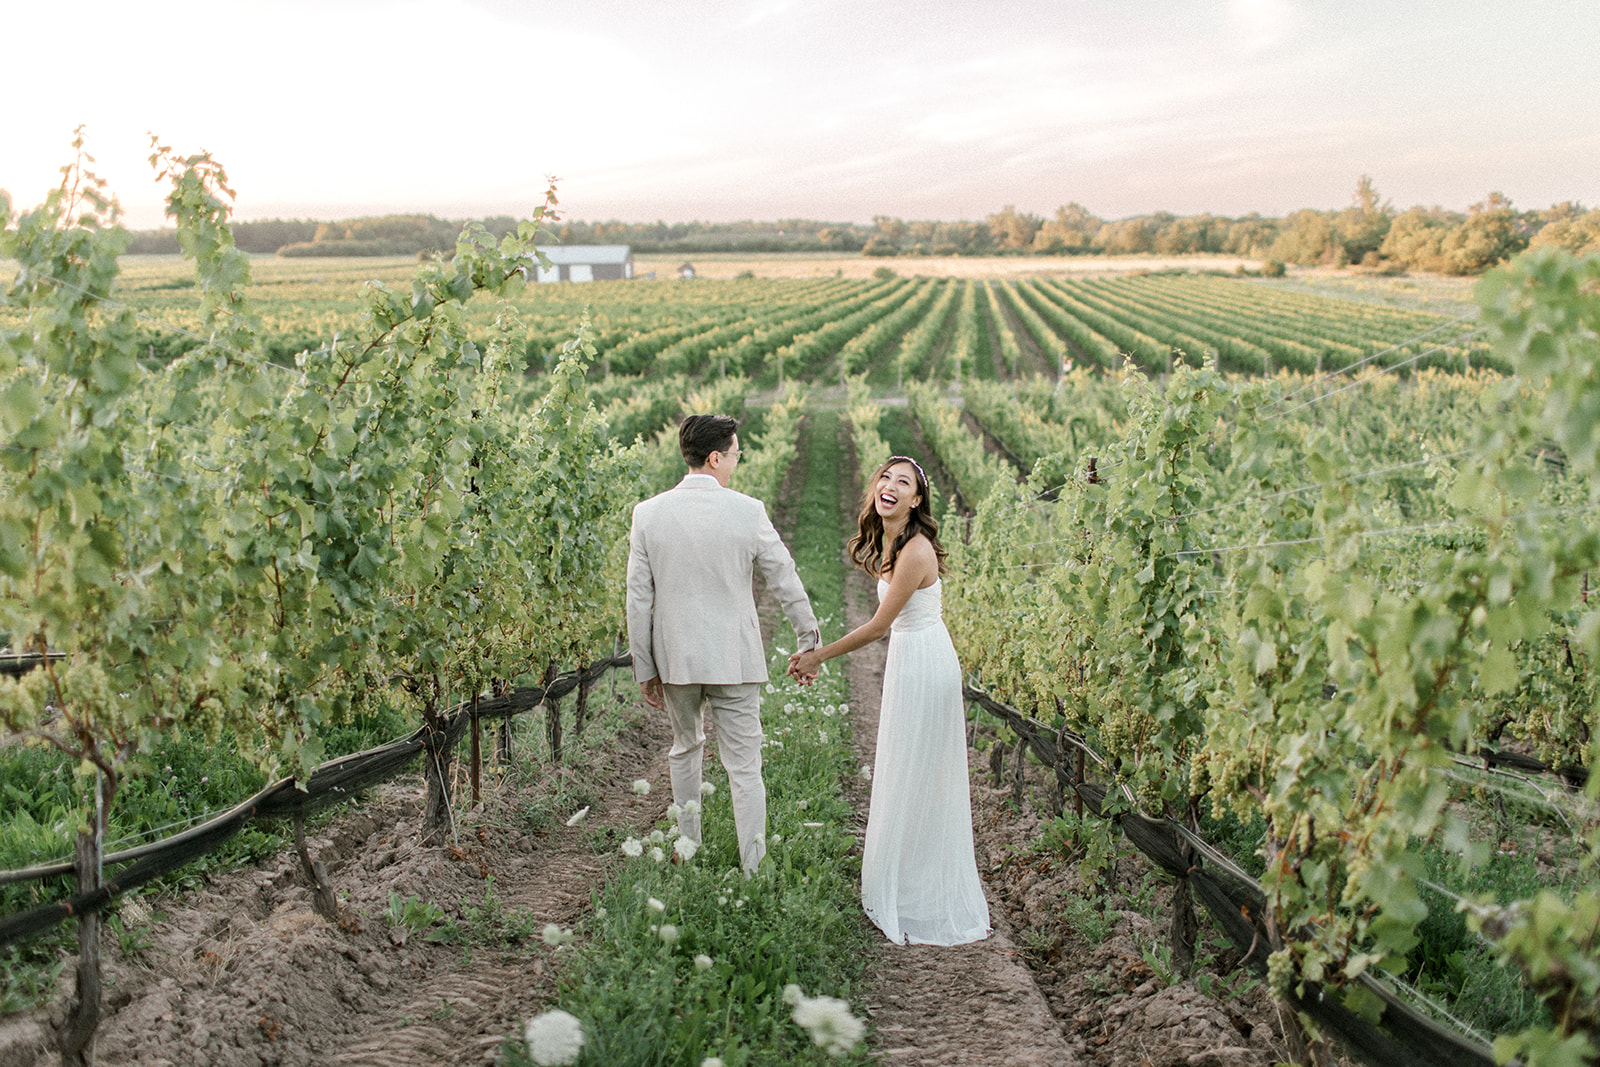 Couple laughs and walks through the grape vines during their wedding at Ravine Vineyard Estate Winery